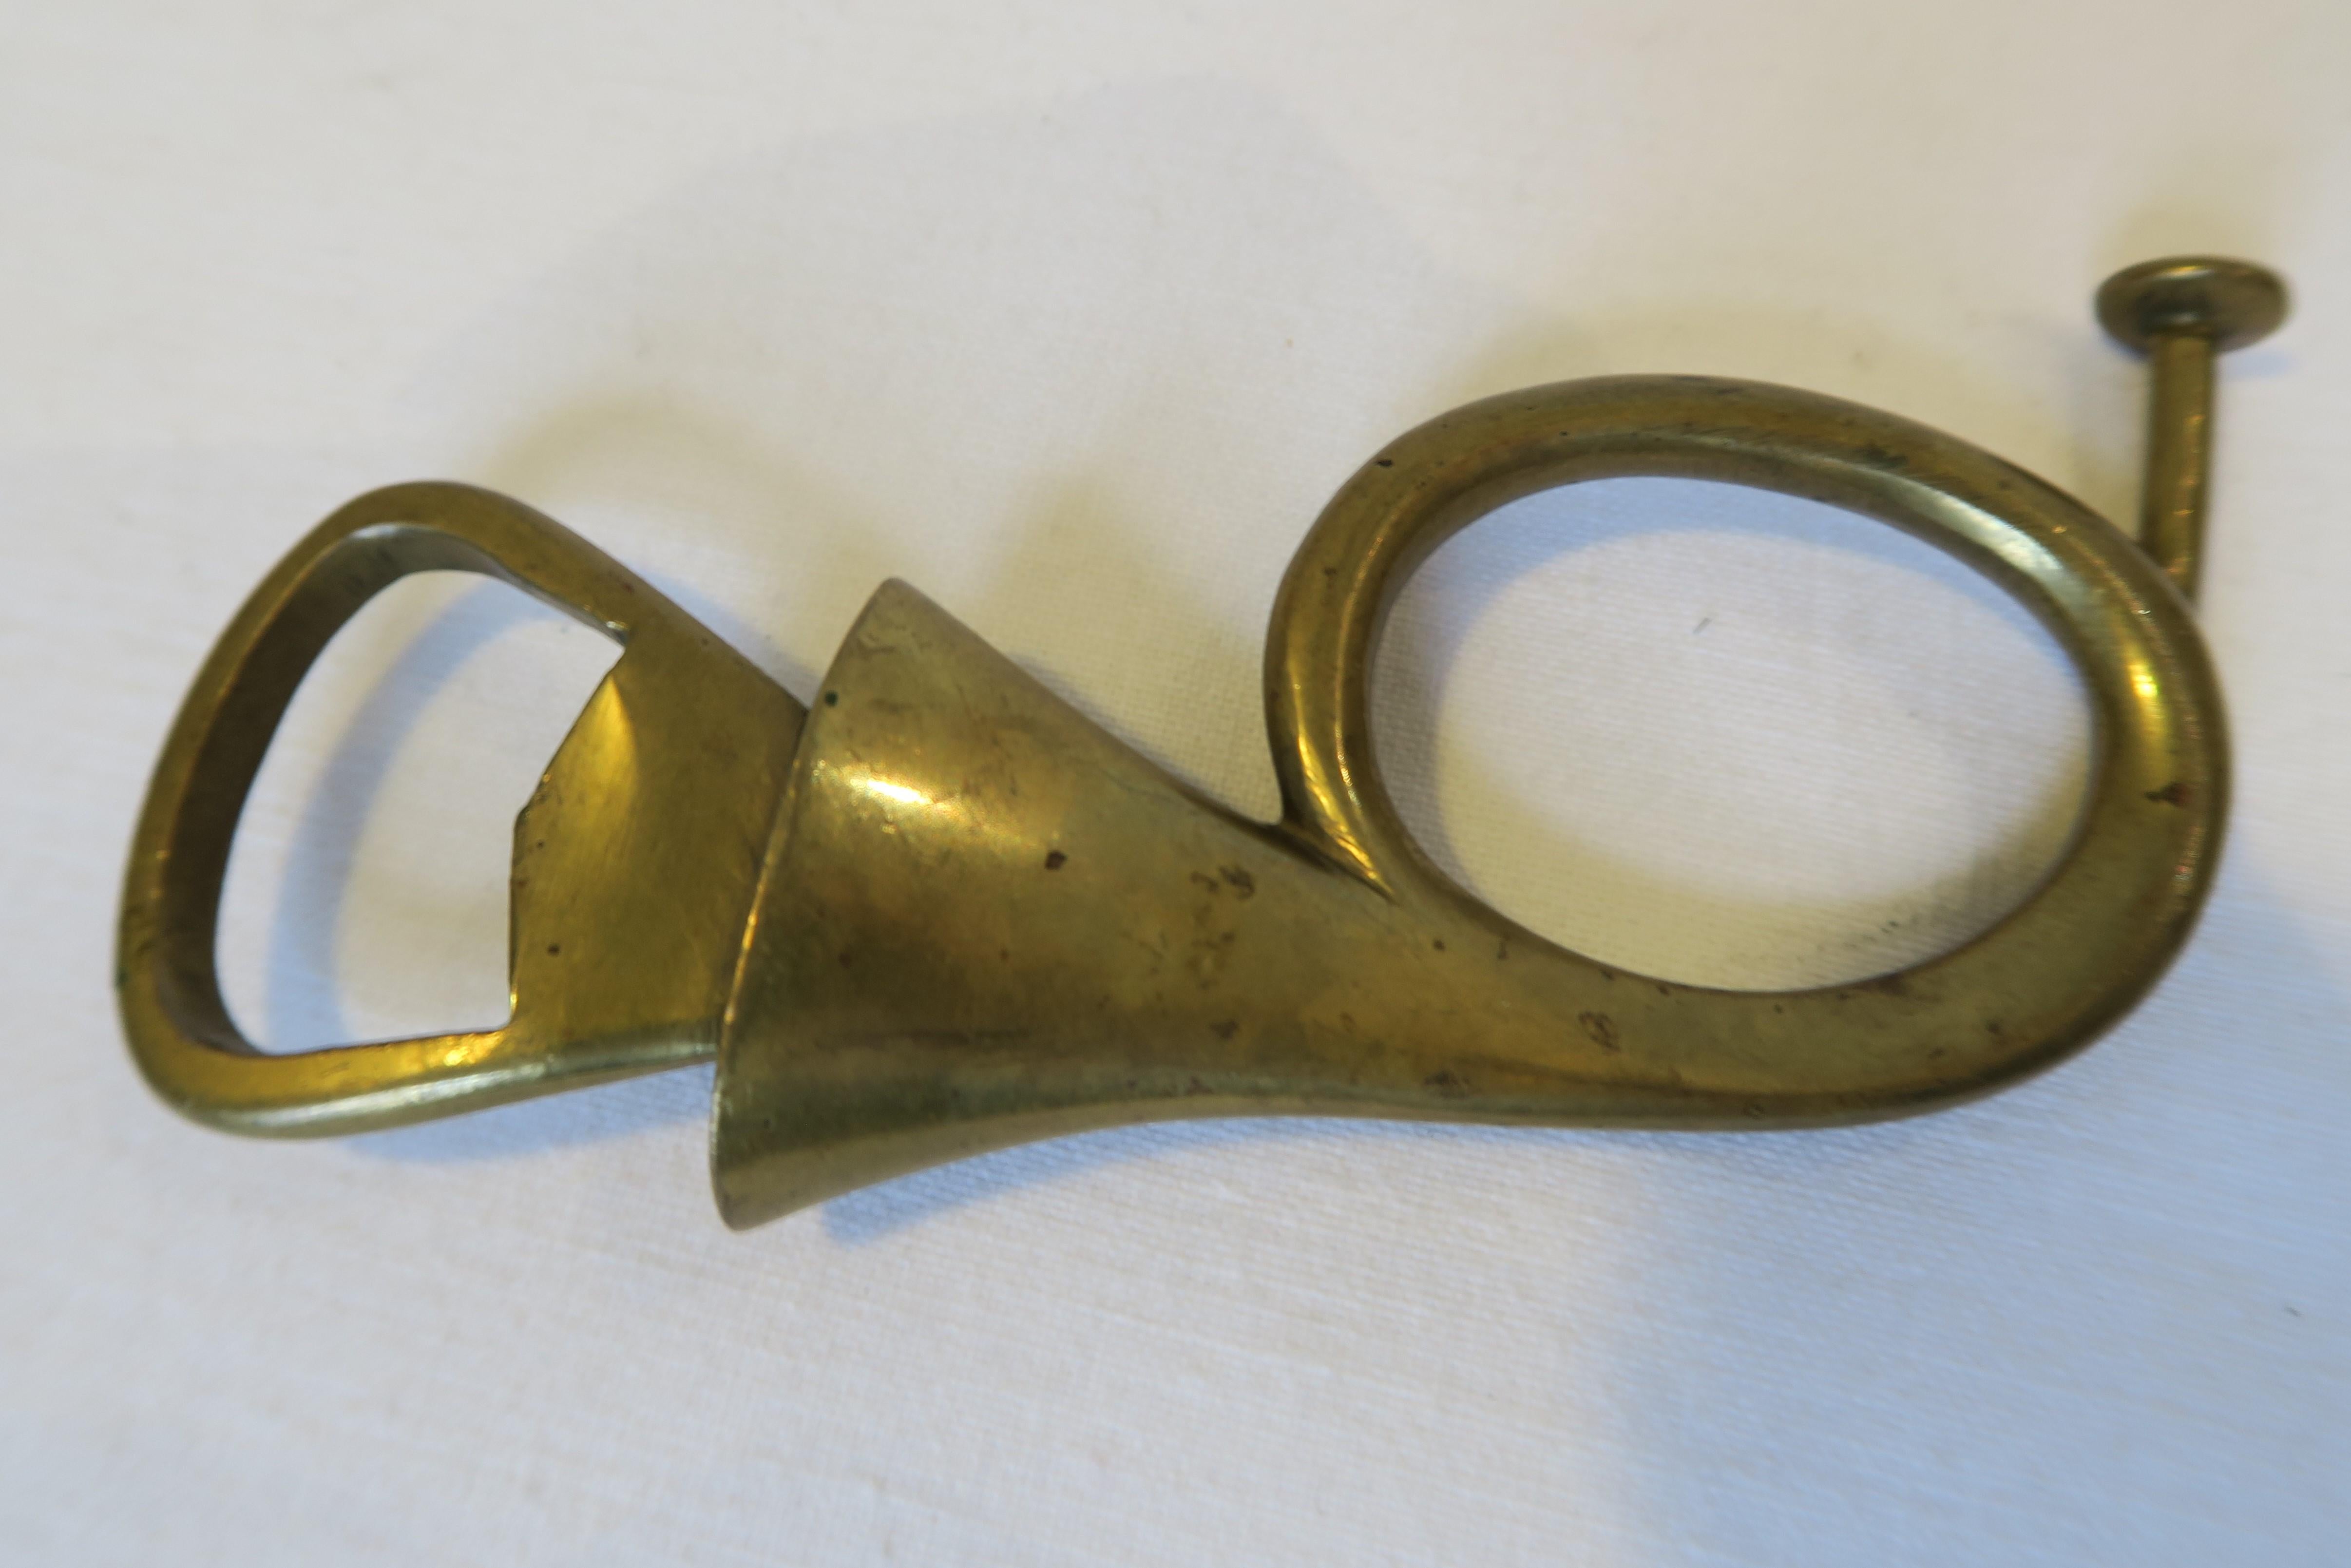 For sale is a beautiful bottle opener in the shape of a post horn. Both were crafted from brass and designed by the renowned workshops of Carl Auböck in Austria. The item is stamped 